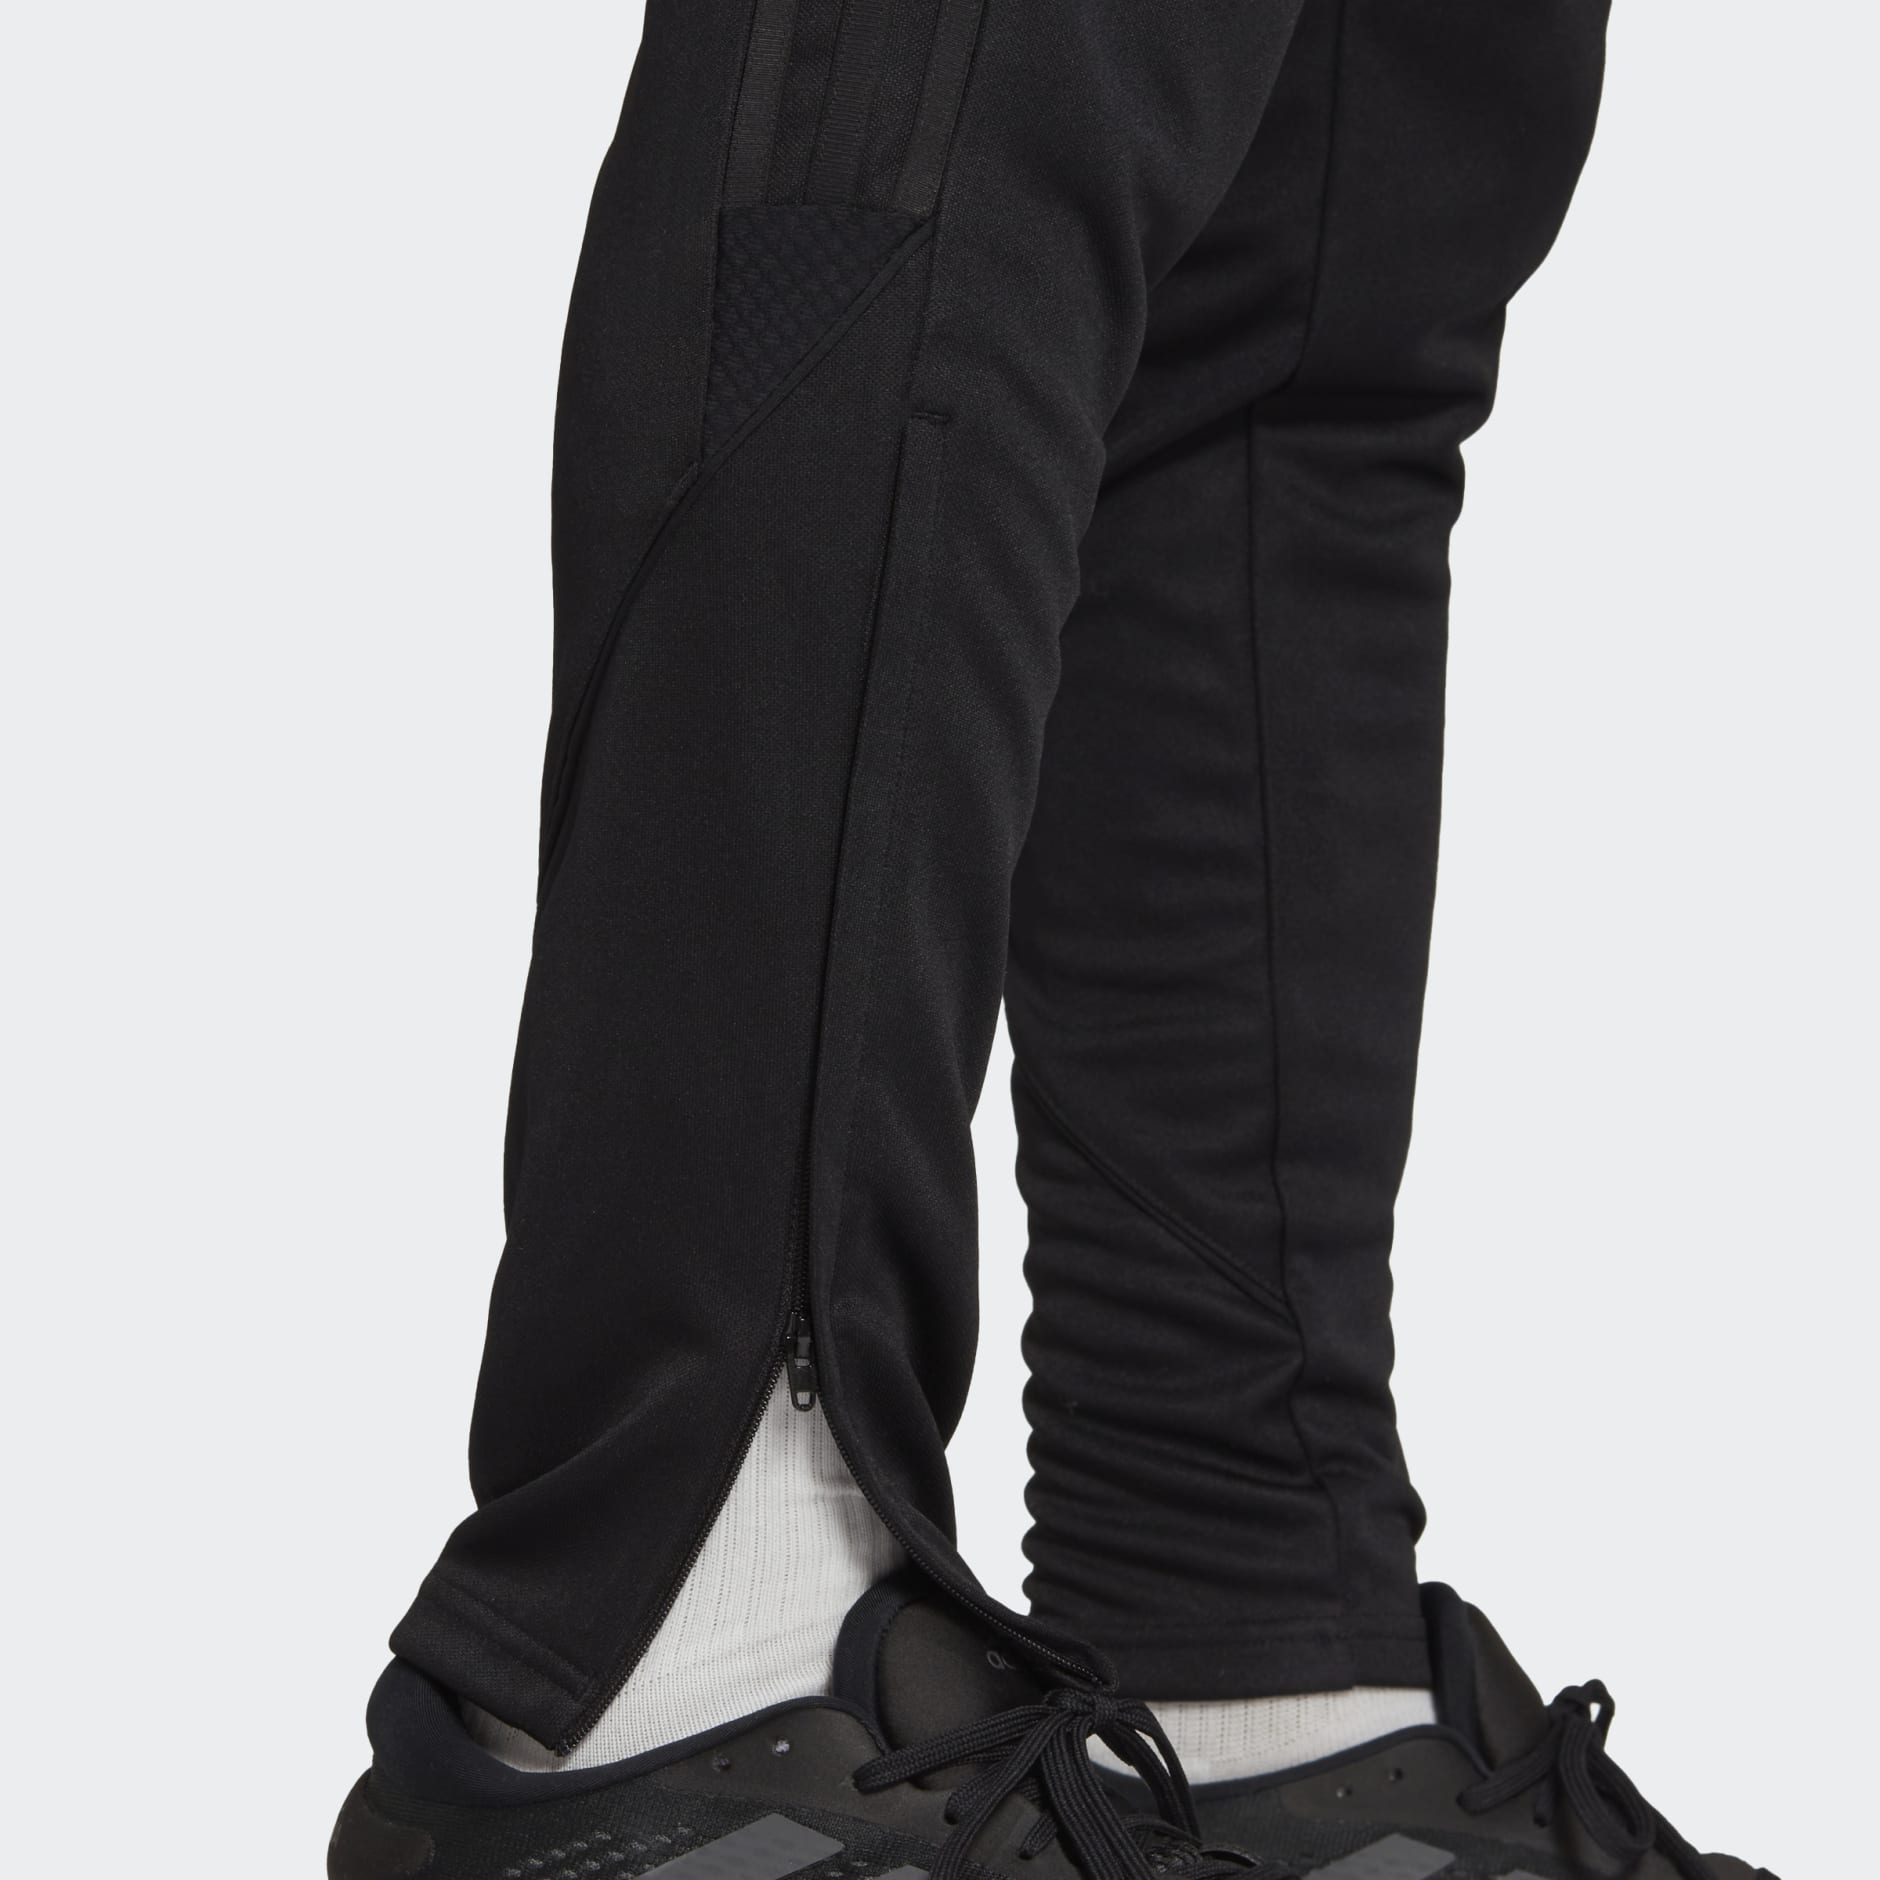 Outdoor Research Men's Astro Pants (Discontinued)